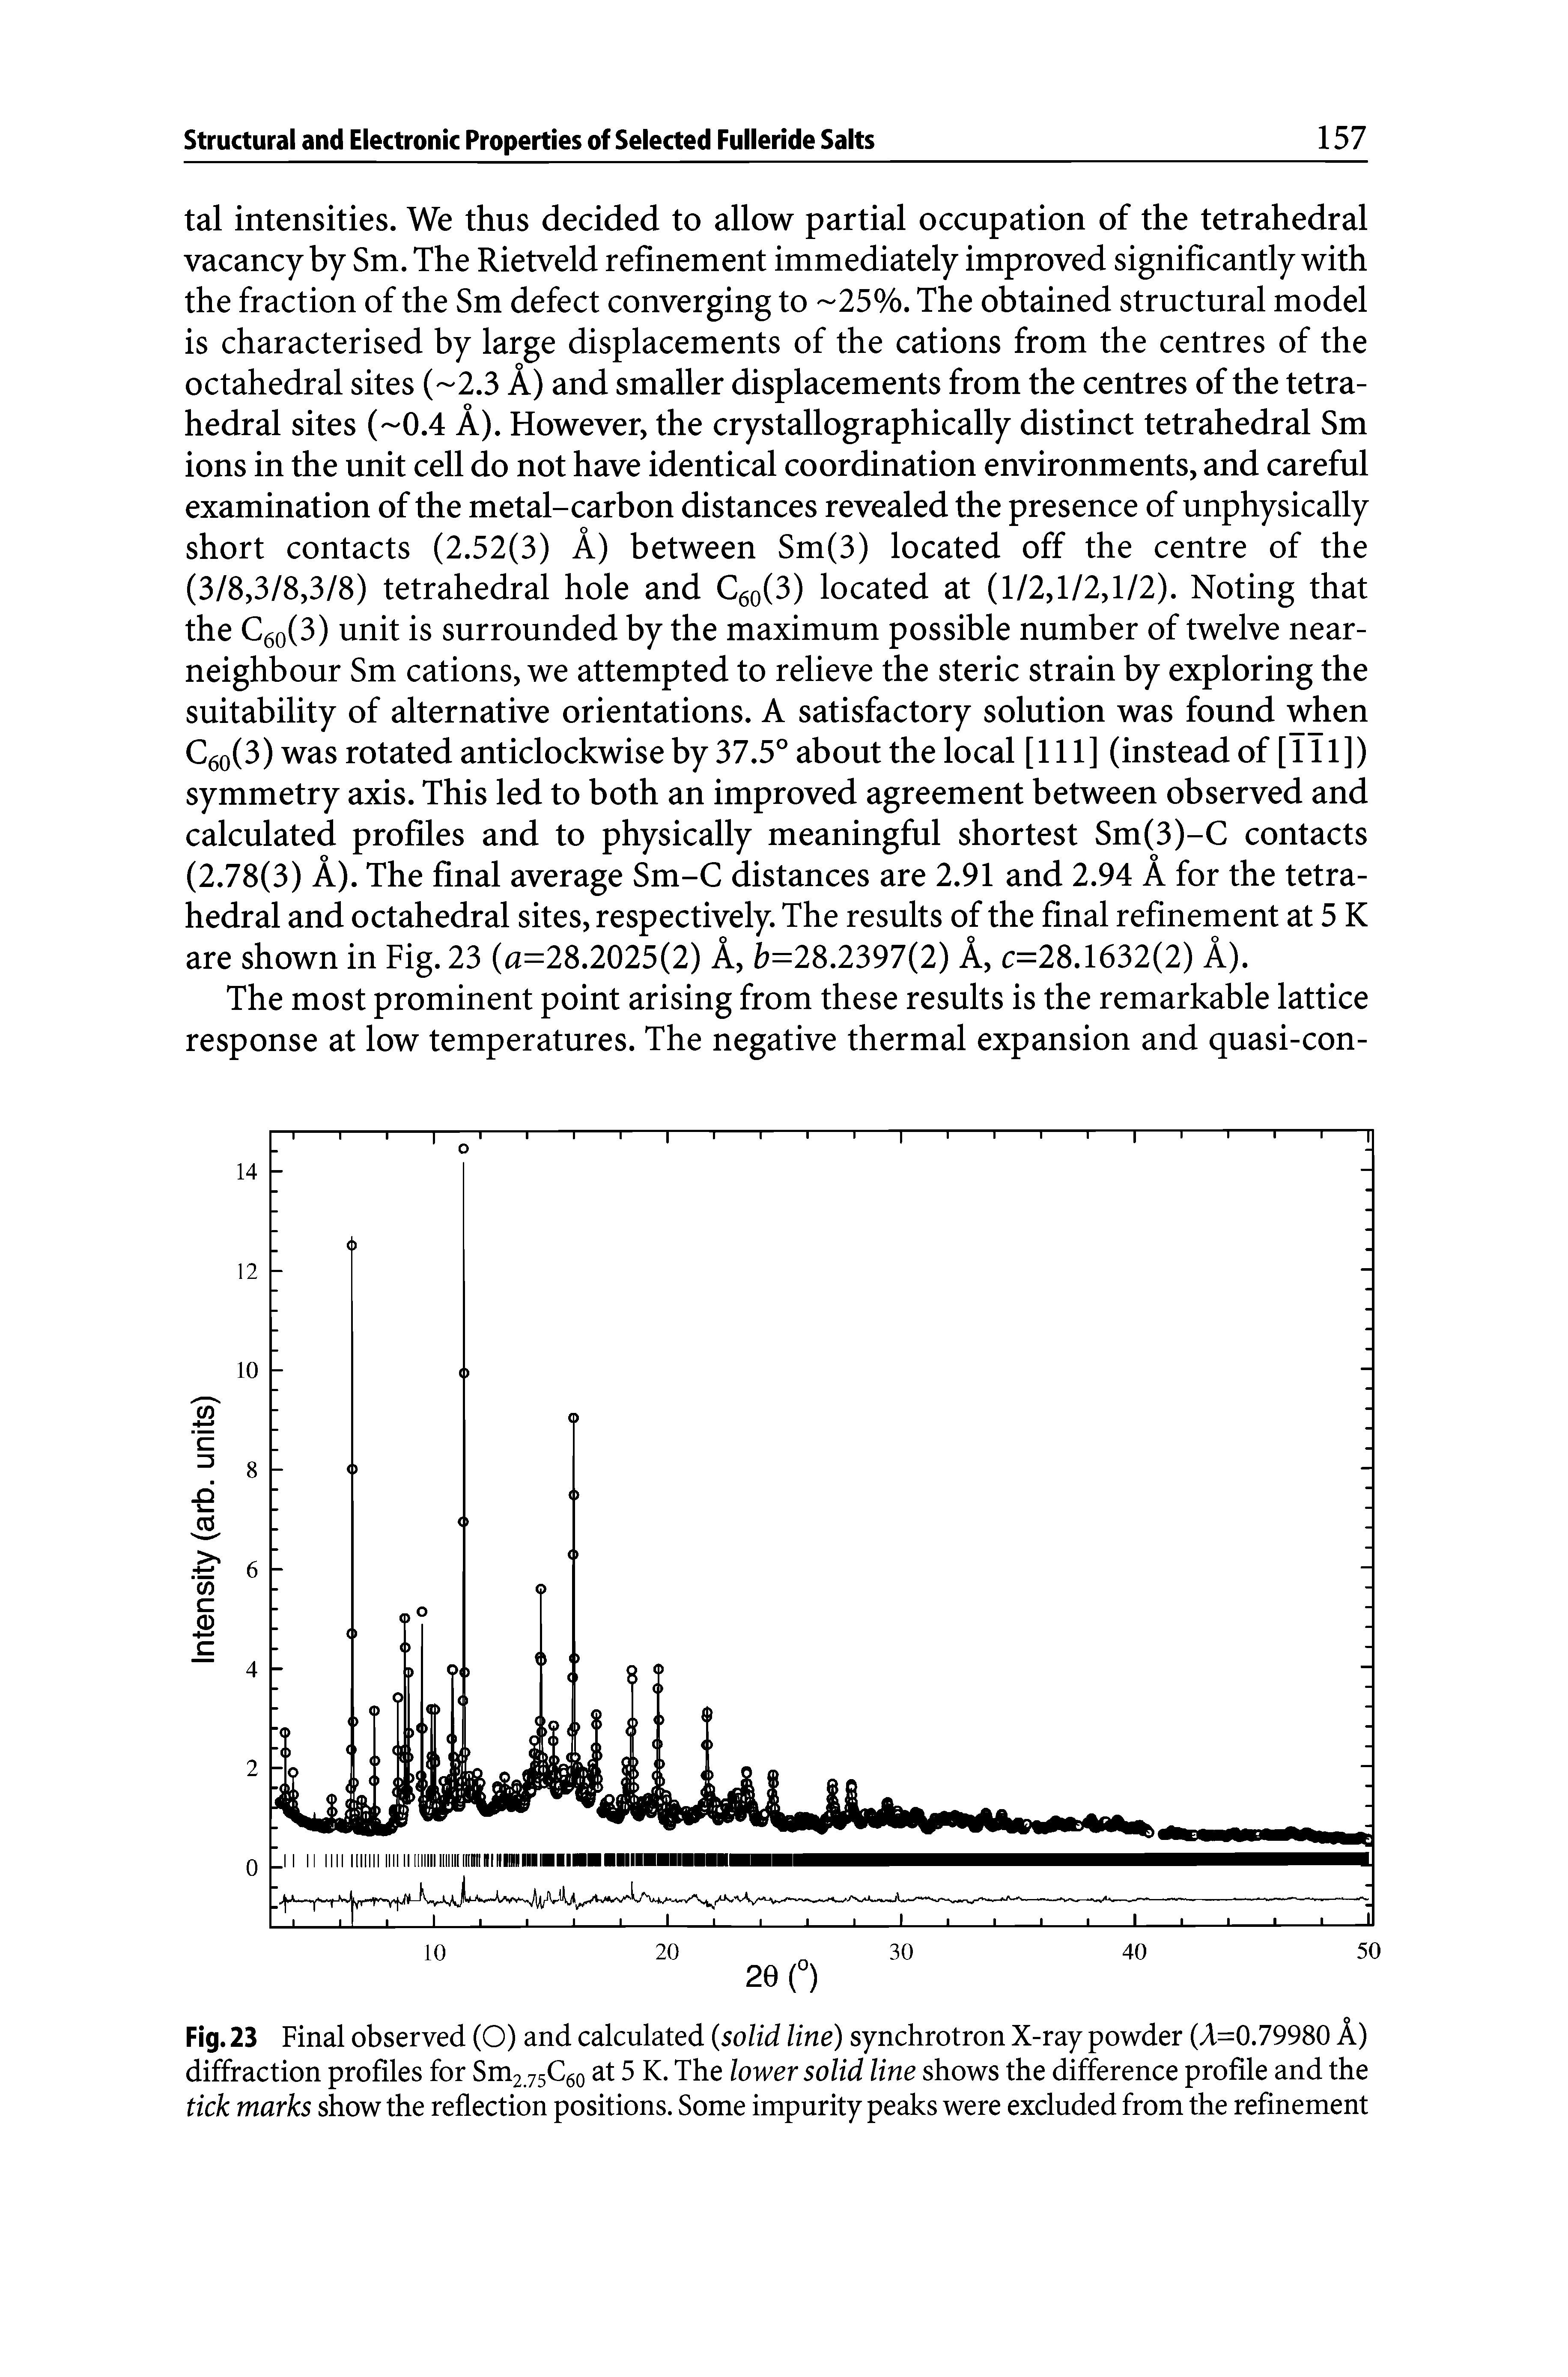 Fig. 23 Final observed (O) and calculated (solid line) synchrotron X-ray powder (A=0.79980 A) diffraction profiles for Sm2.75C6o at 5 K. The lower solid line shows the difference profile and the tick marks show the reflection positions. Some impurity peaks were excluded from the refinement...